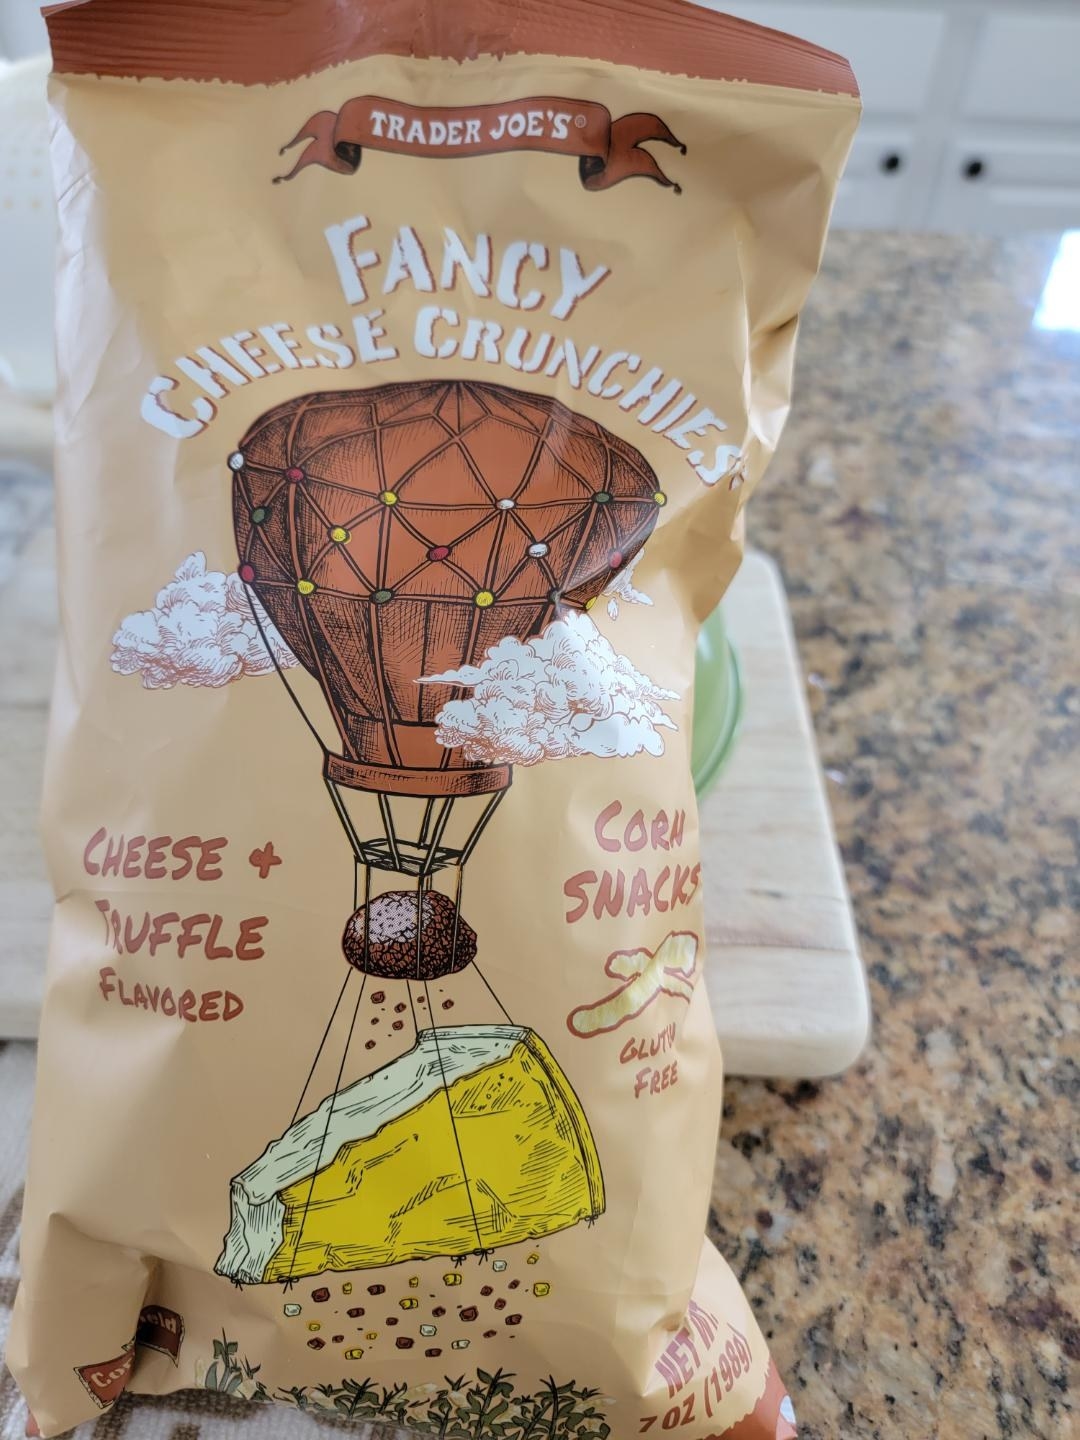 A bag of cheese and truffle flavors corn snacks